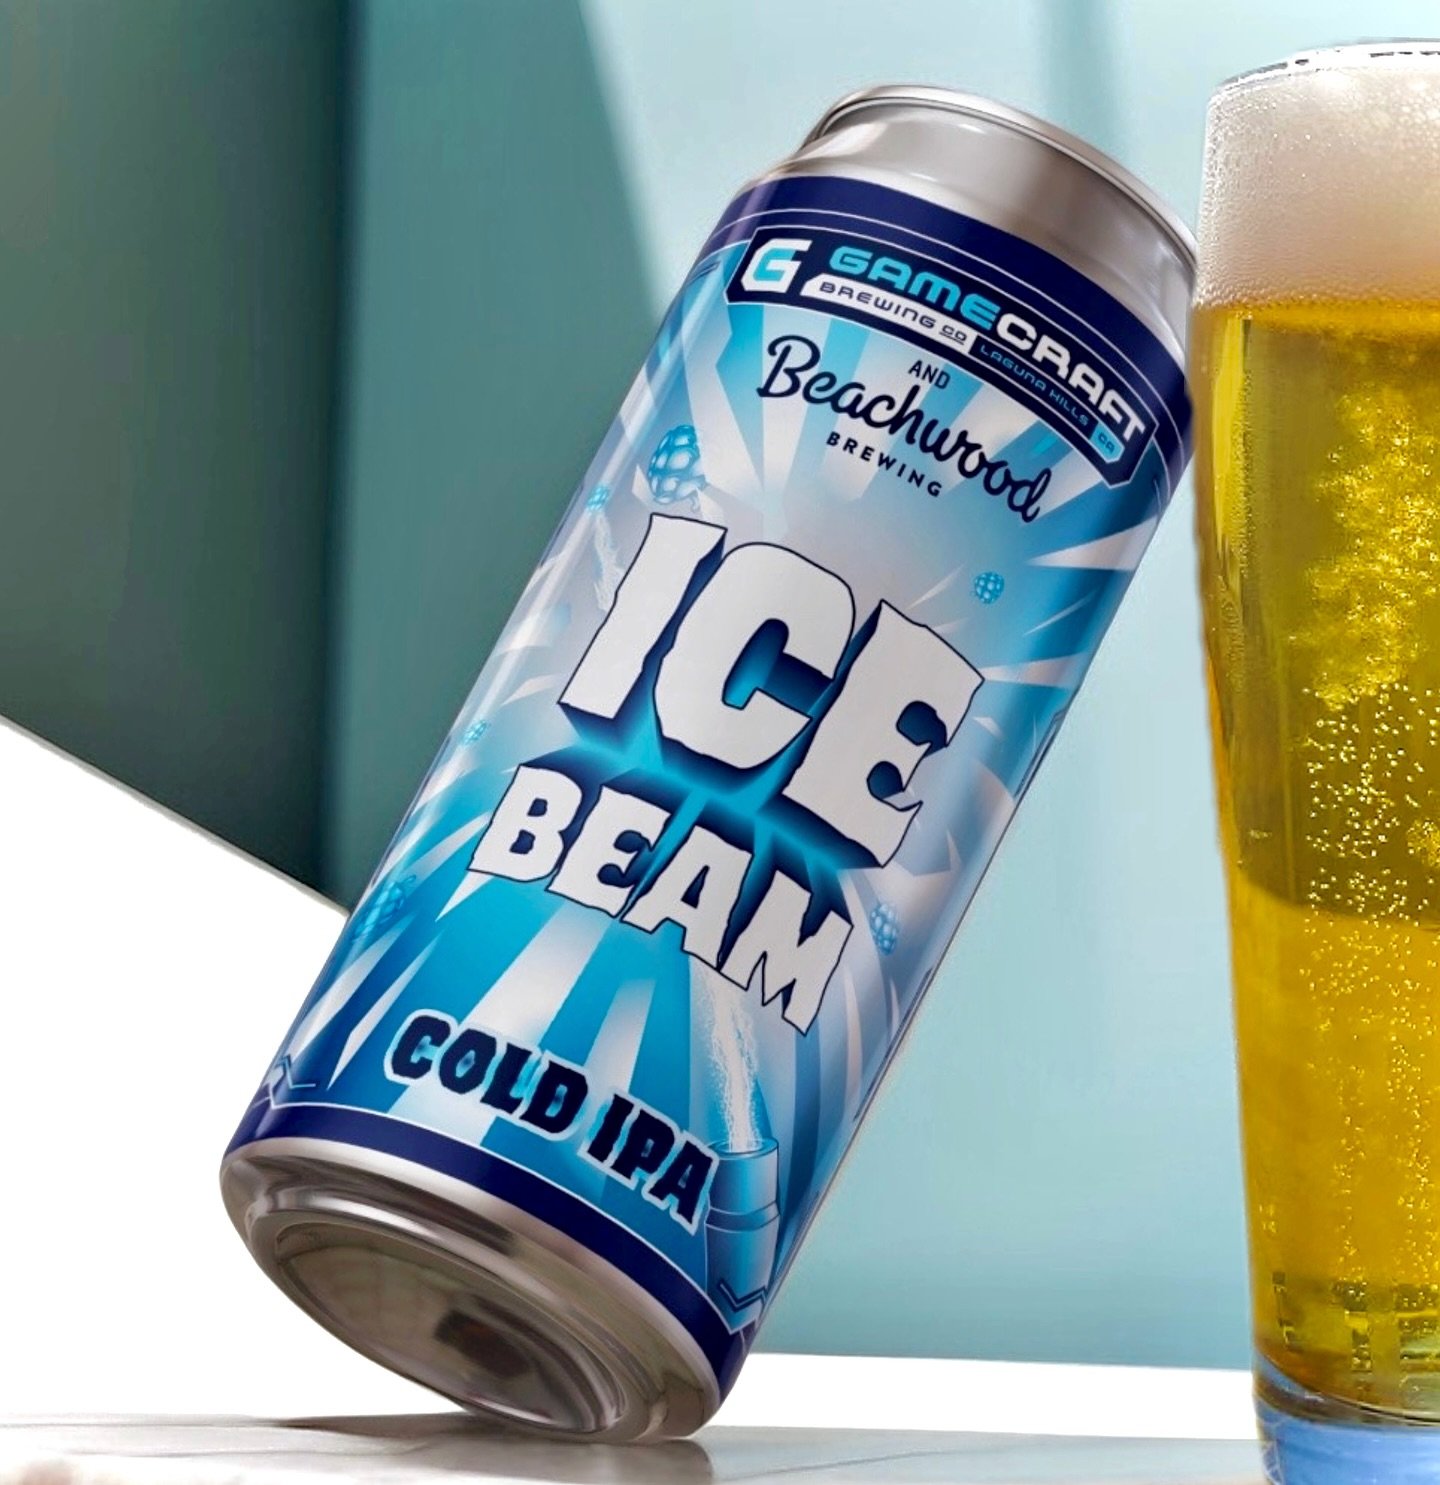 MAY 2 RELEASE - Ice Beam :: Cold IPA
A frigidly cool collab with our amazing friends at @beachwoodbrewing arrives this week! 

🥶 Voyage into frozen space with Ice Beam. A chilling assault of Citra-702, Idaho-7, HBC-586 and Mosaic cryo hops unleash a